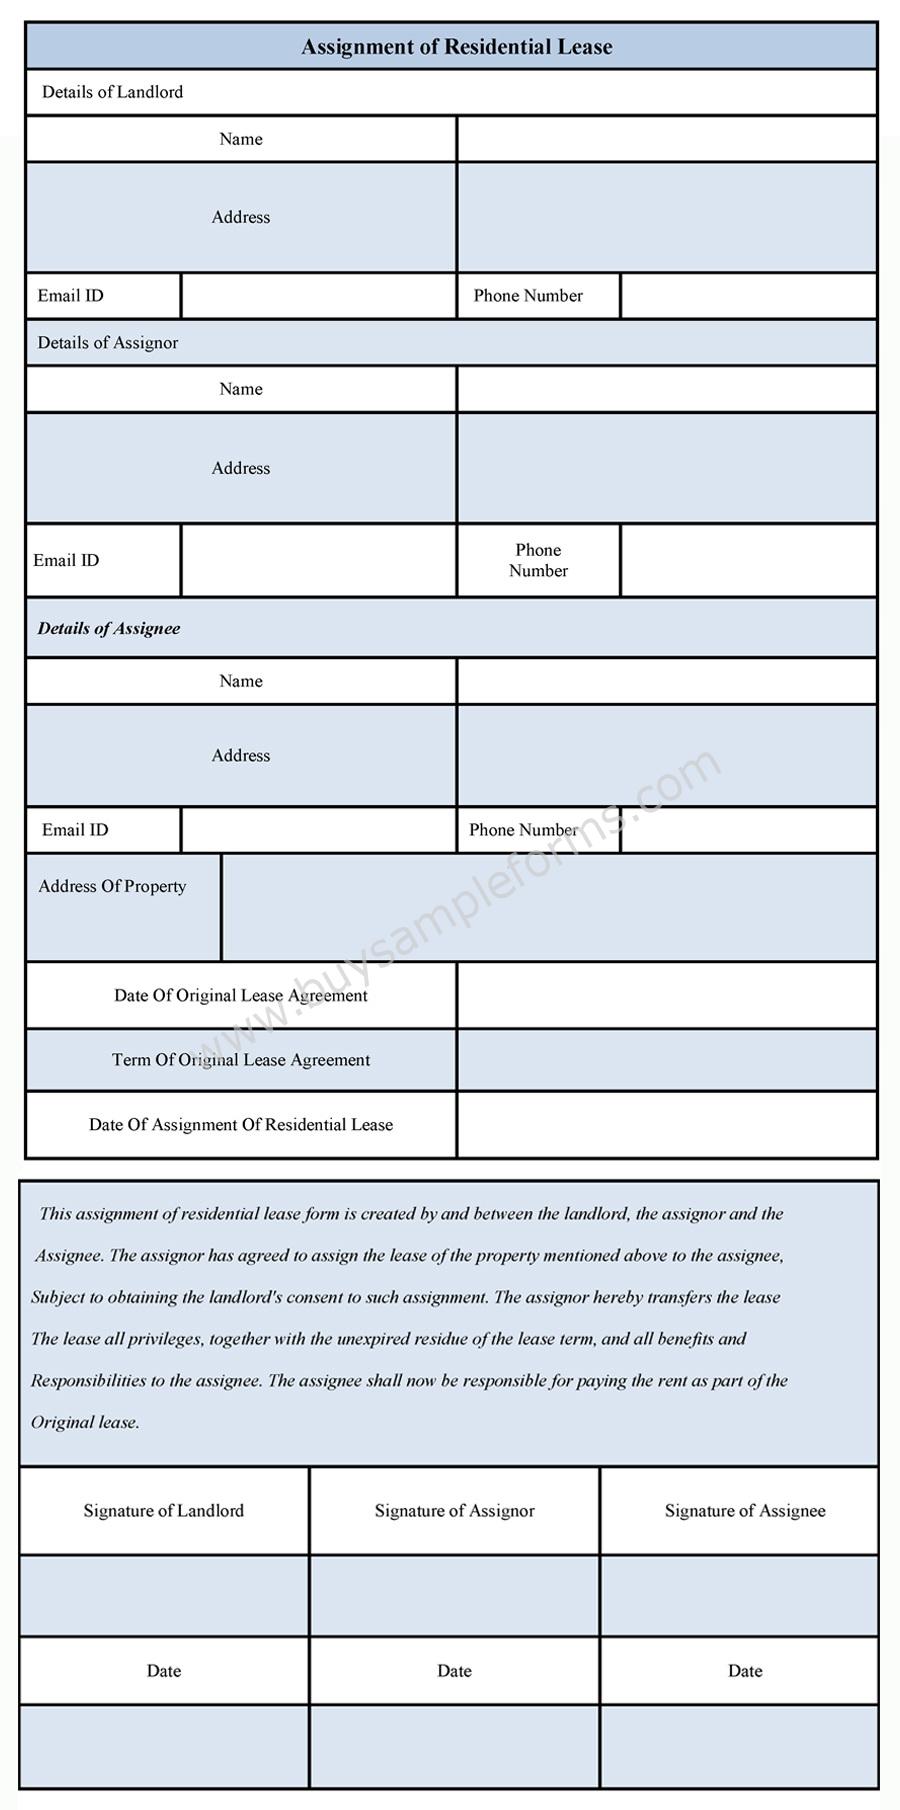 Assignment of Residential Lease Form